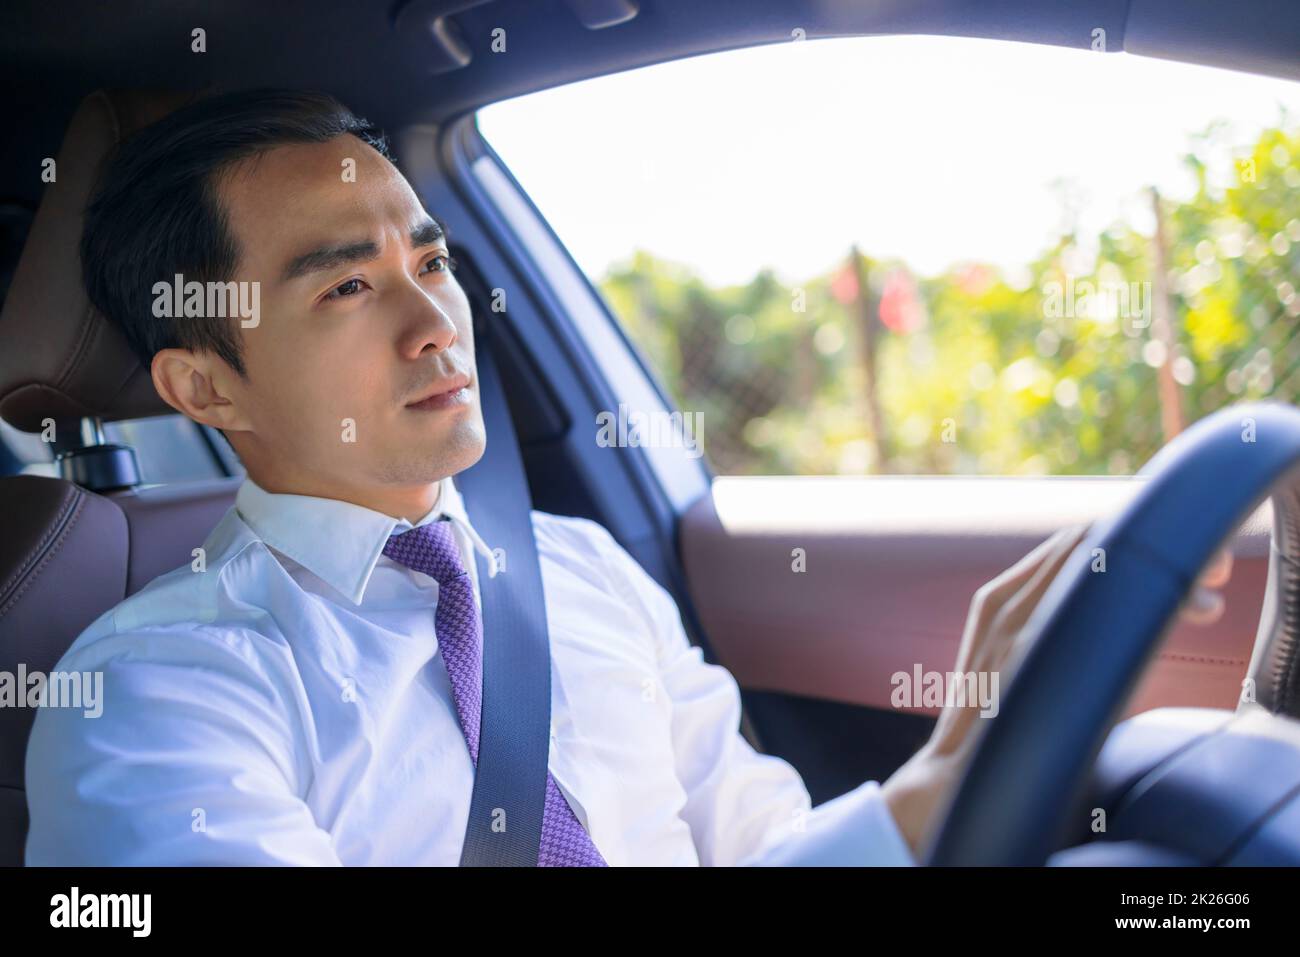 Handsome young man driving a car Stock Photo